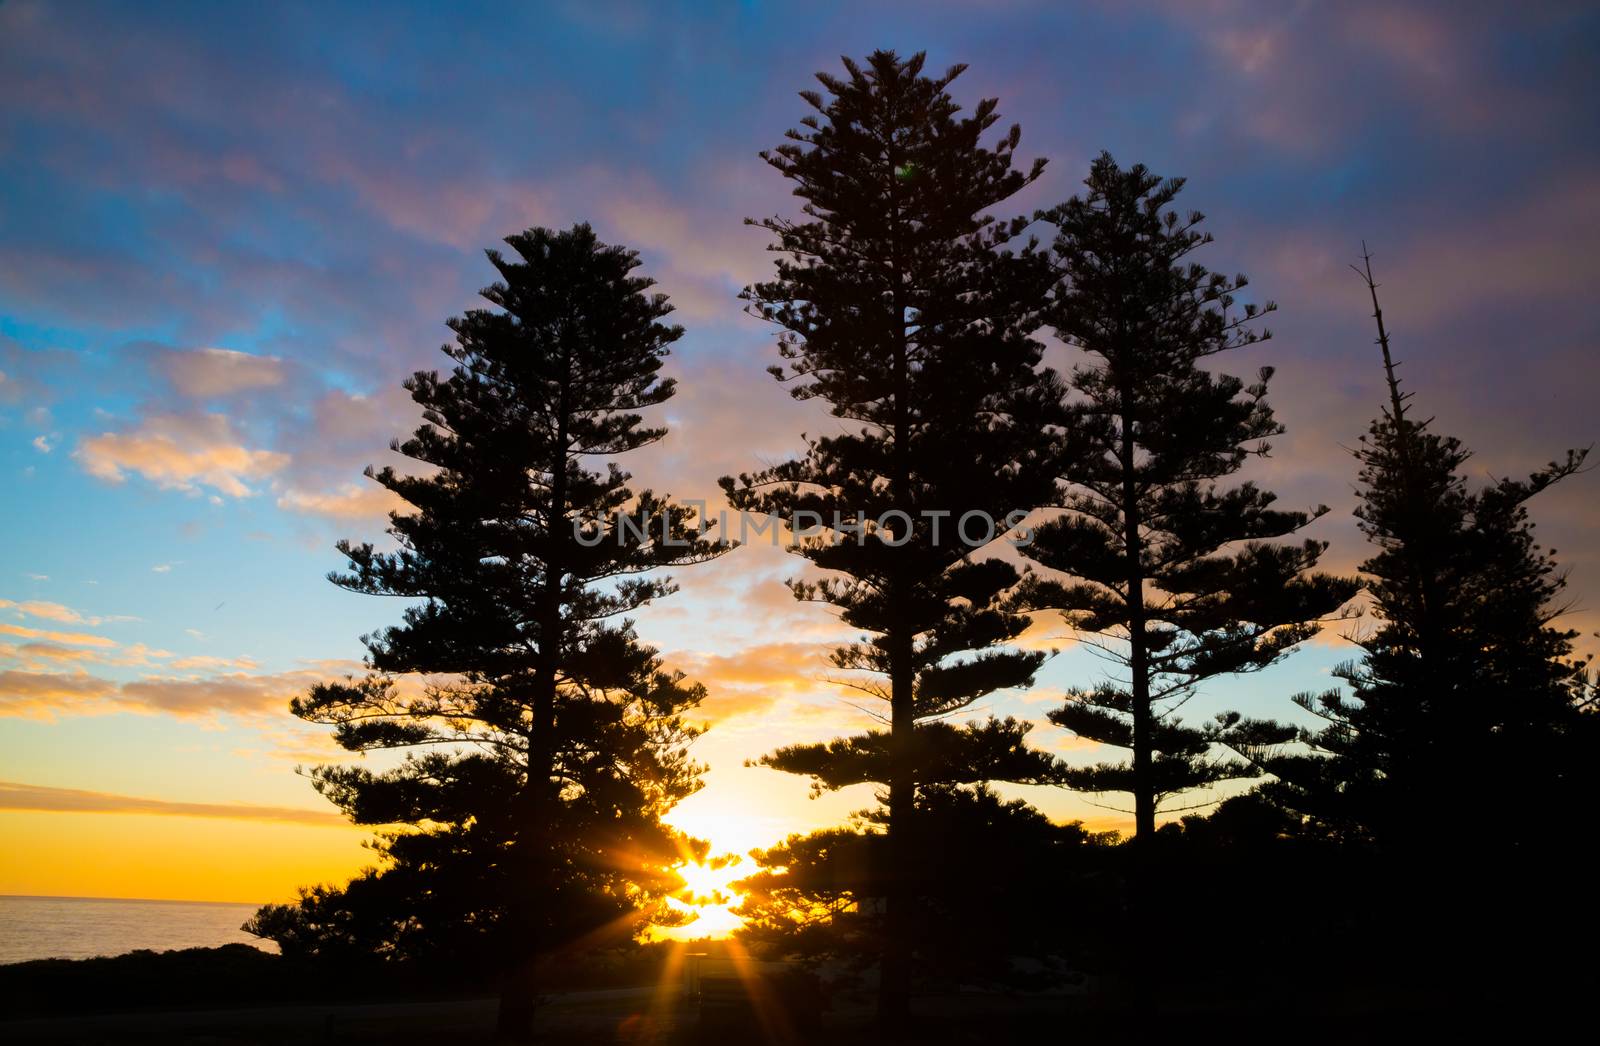 Pretty sunset at the ocean with tall pine trees silhouetted in the foreground